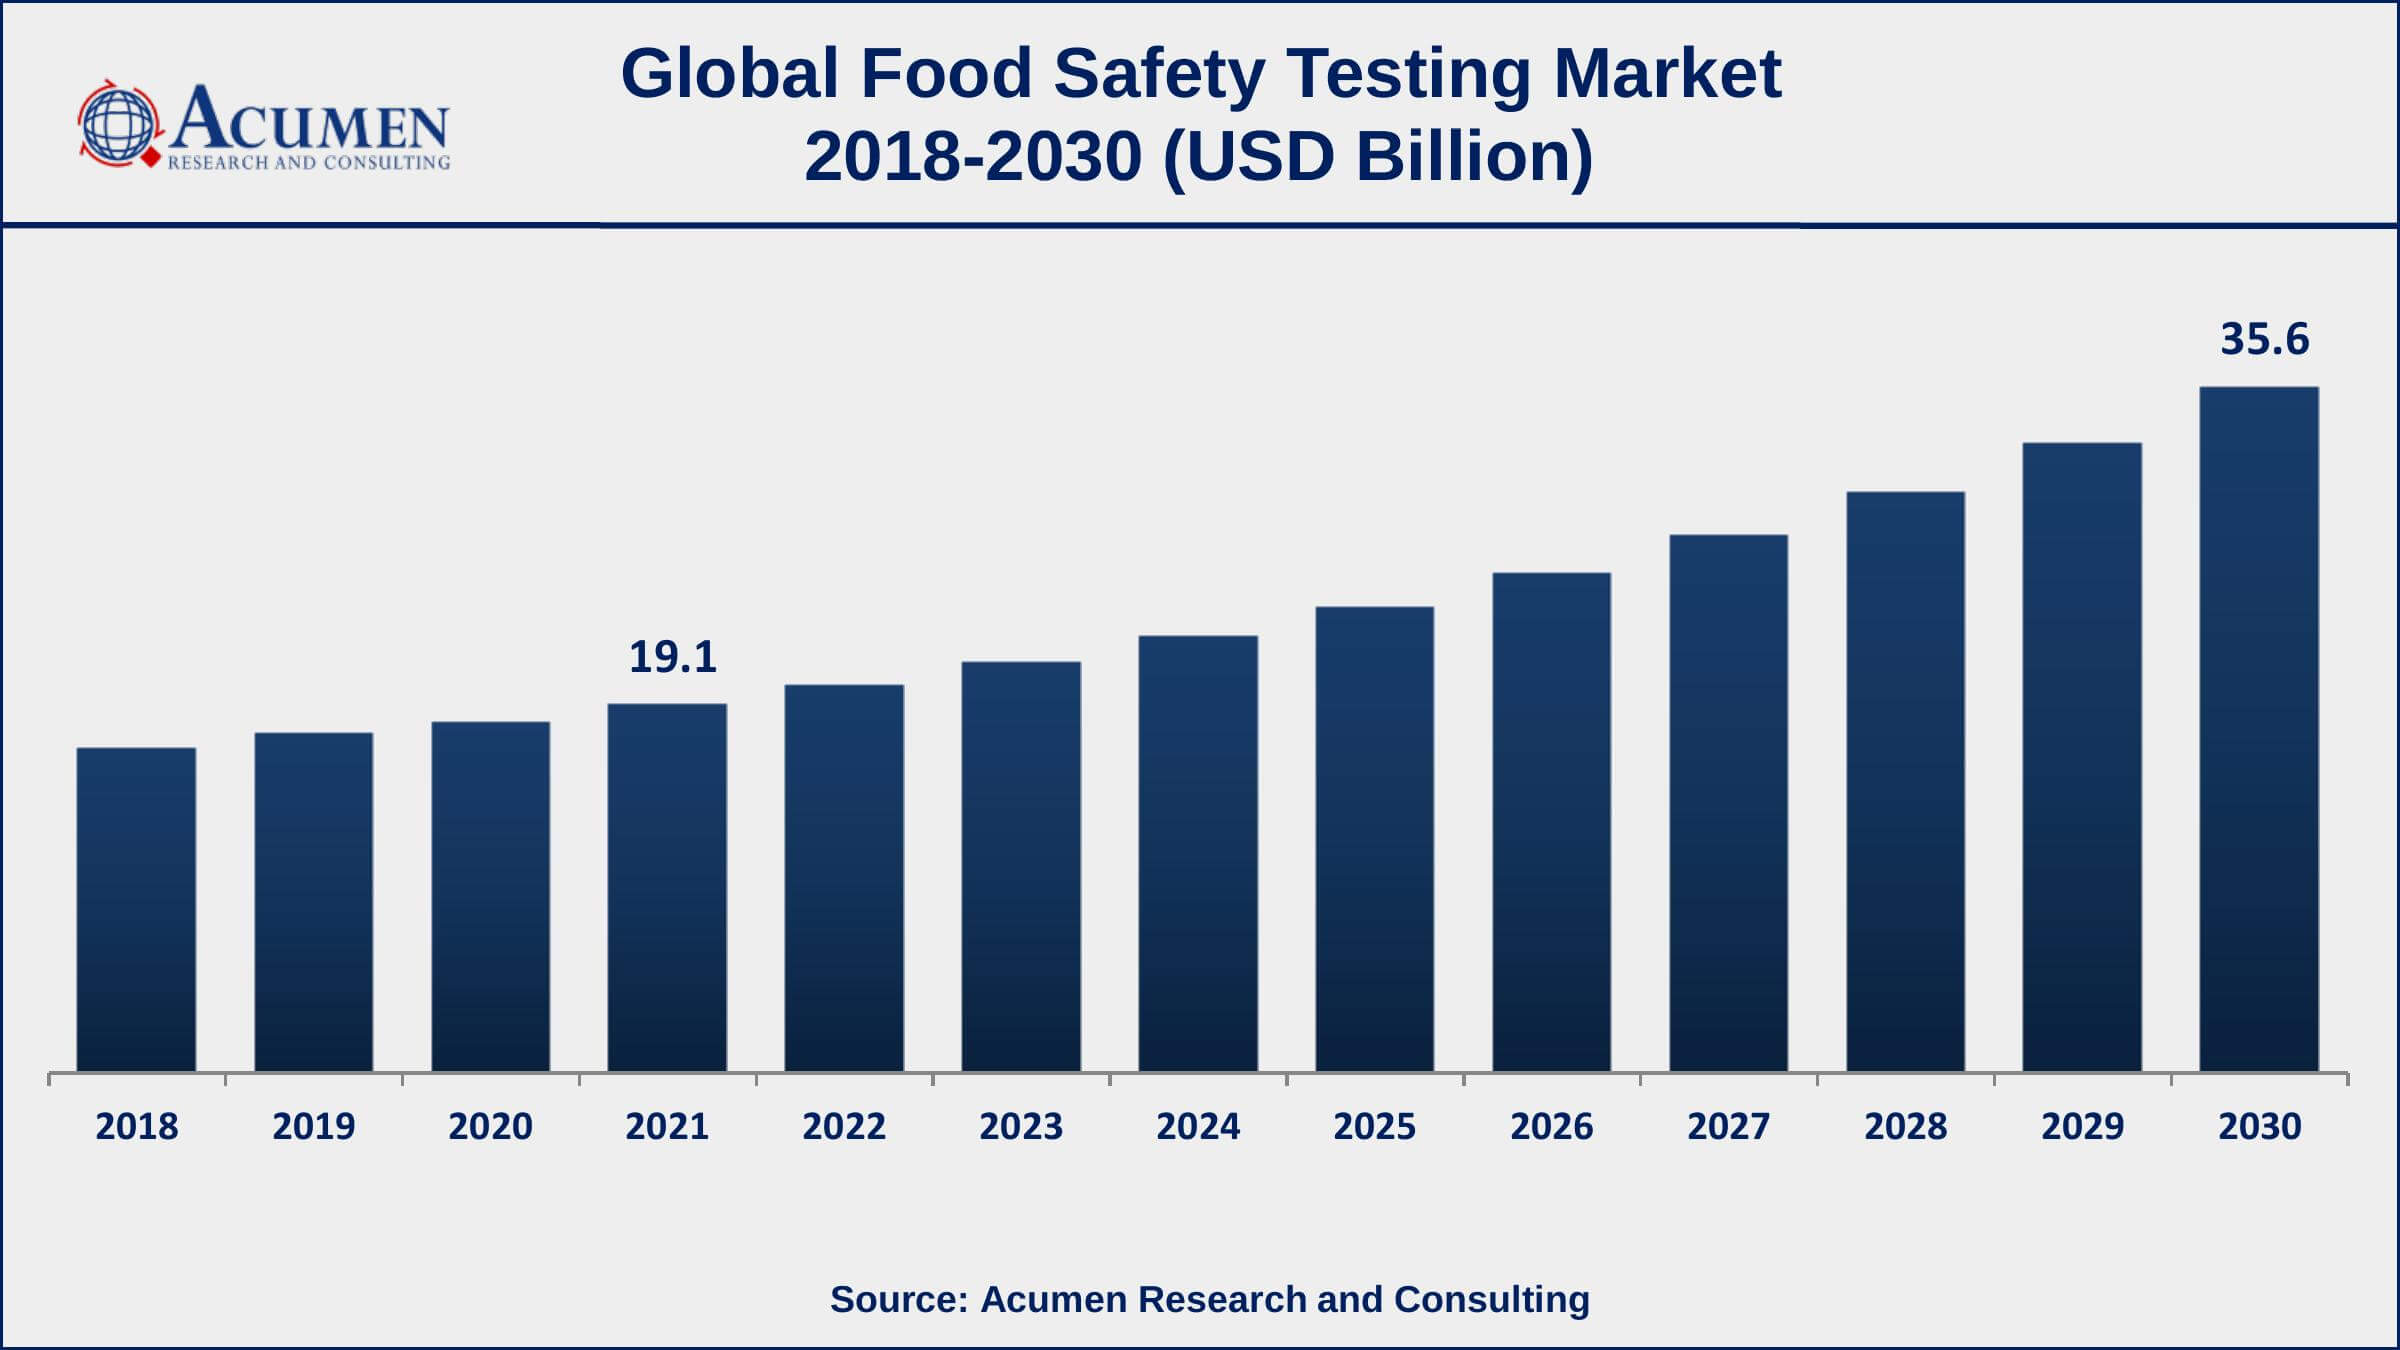 Europe region led with more than 36% of food safety testing market share in 2021